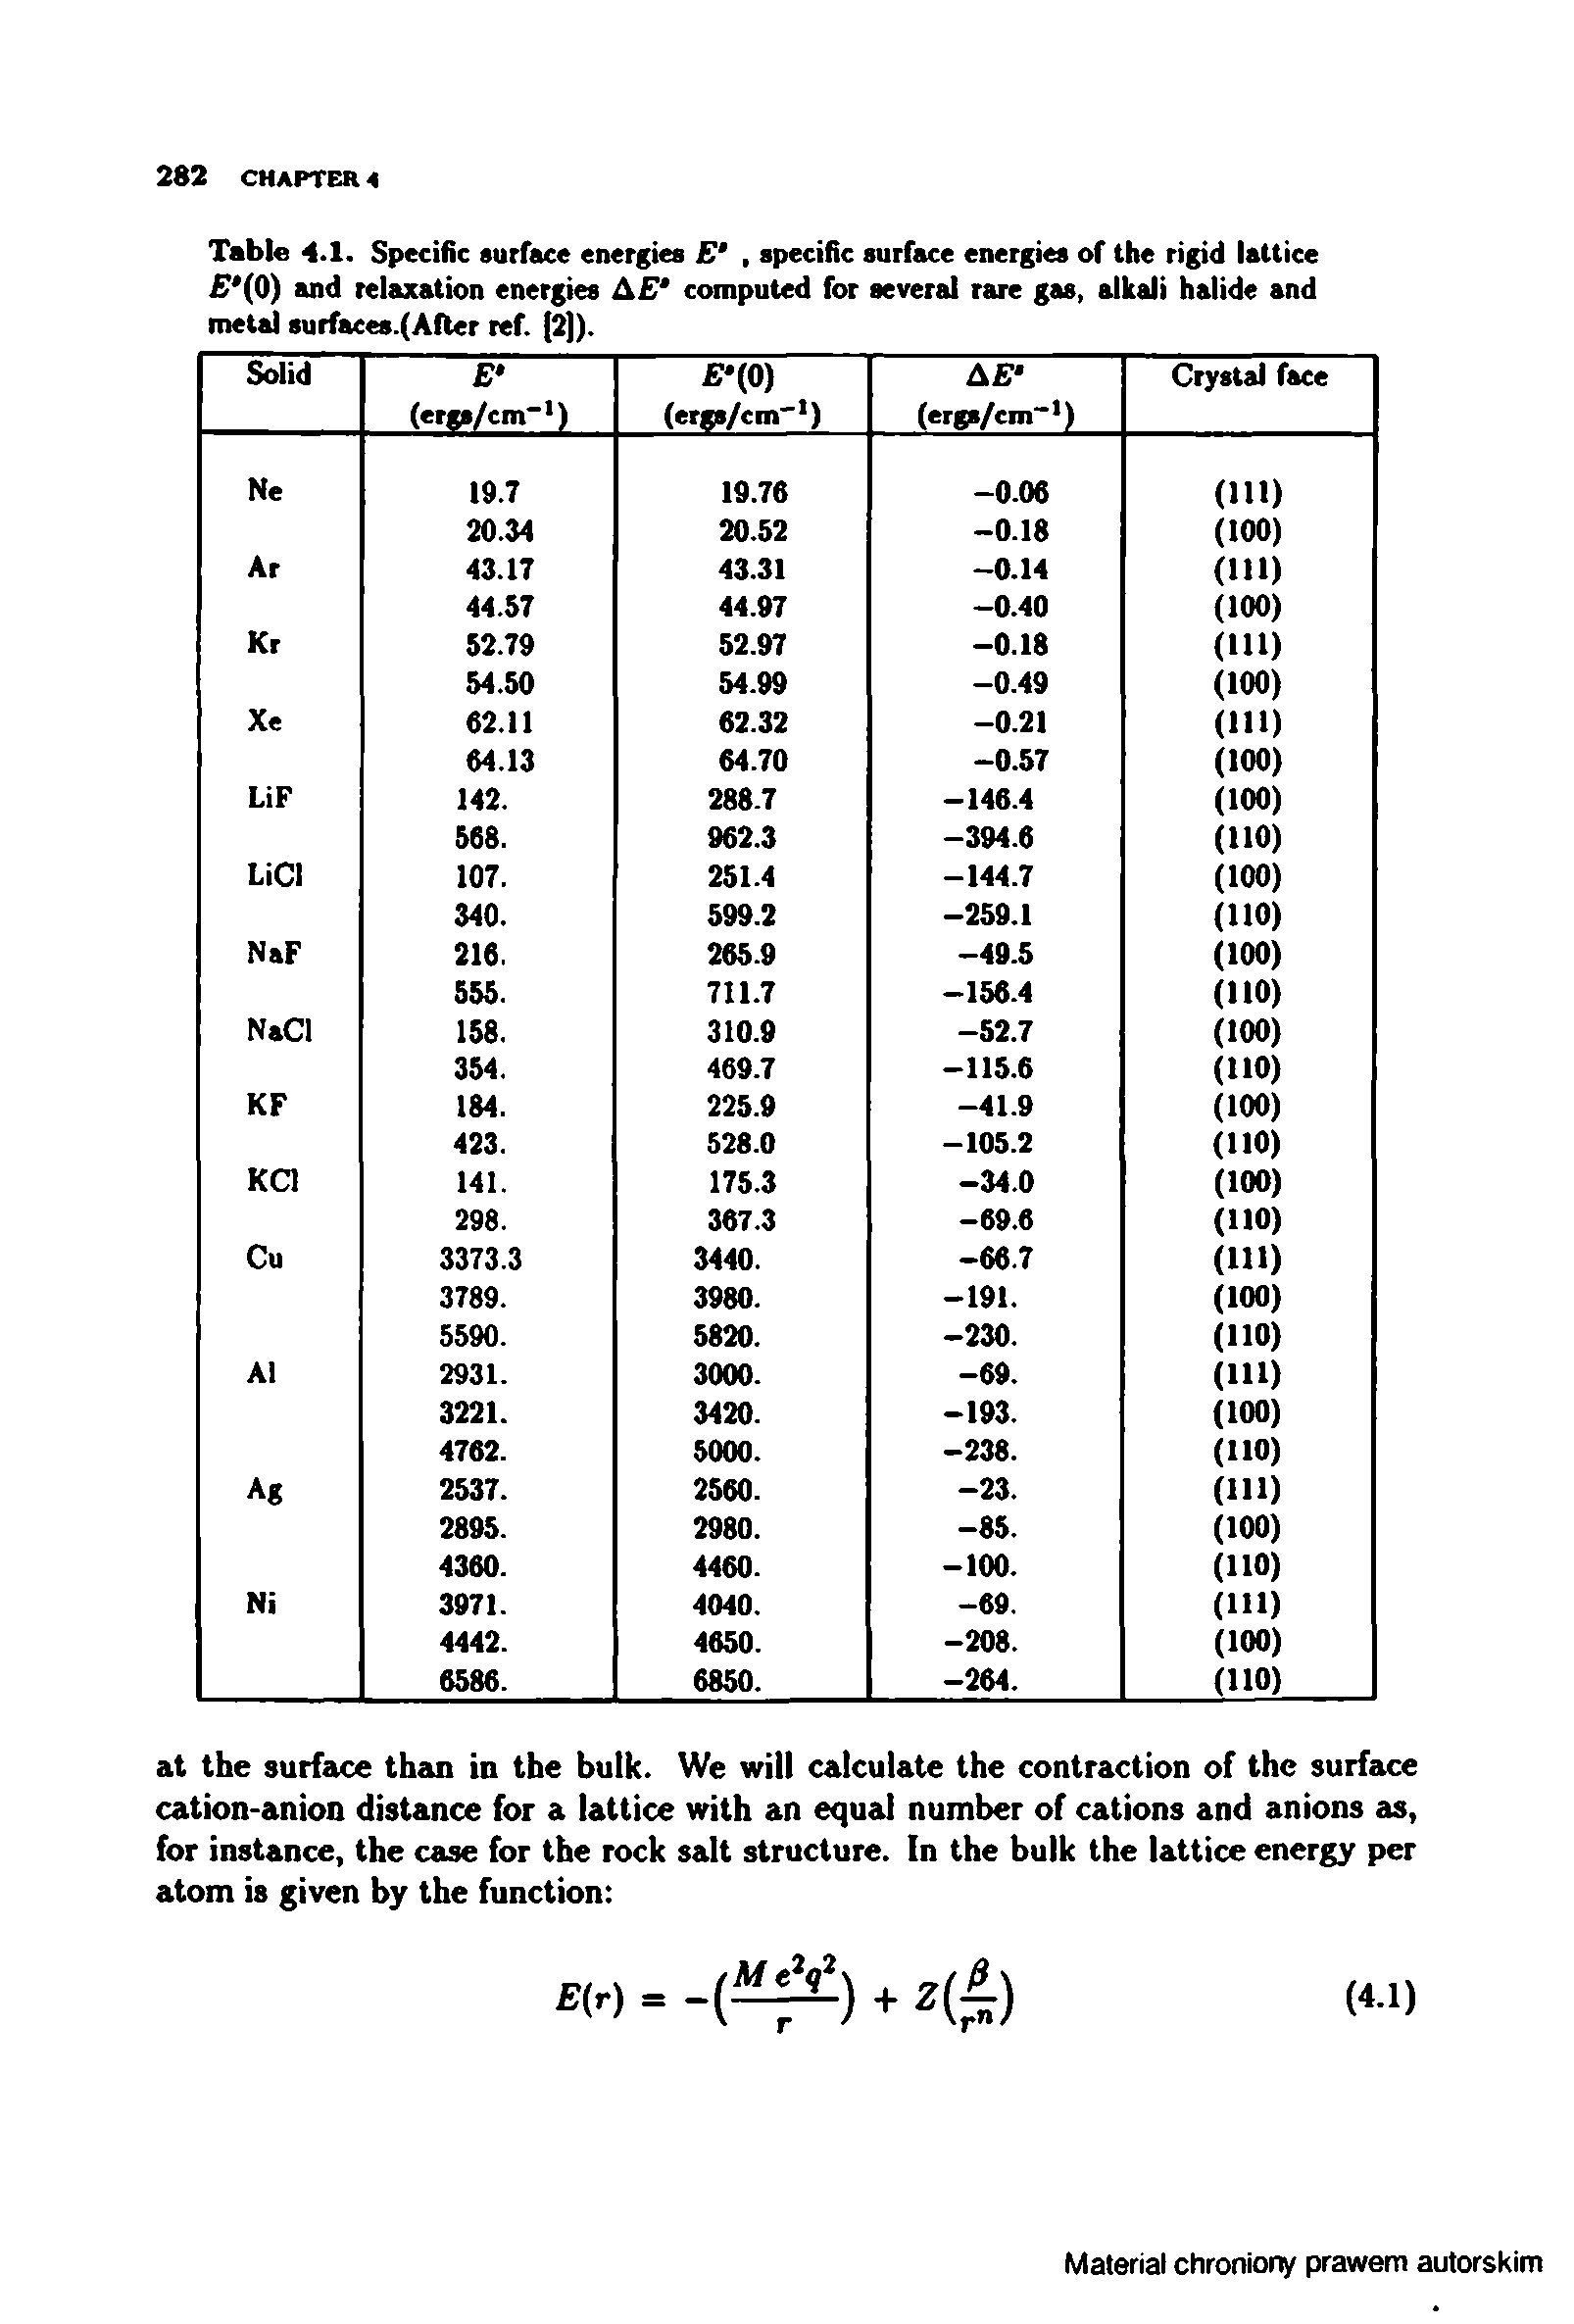 Table 4.1. Specific surface energies E , specific surface energies of the rigid lattice (0) and relaxation energies AE computed for several rare gas, alkali halide and metaj surfaces.(After ref. (2]).